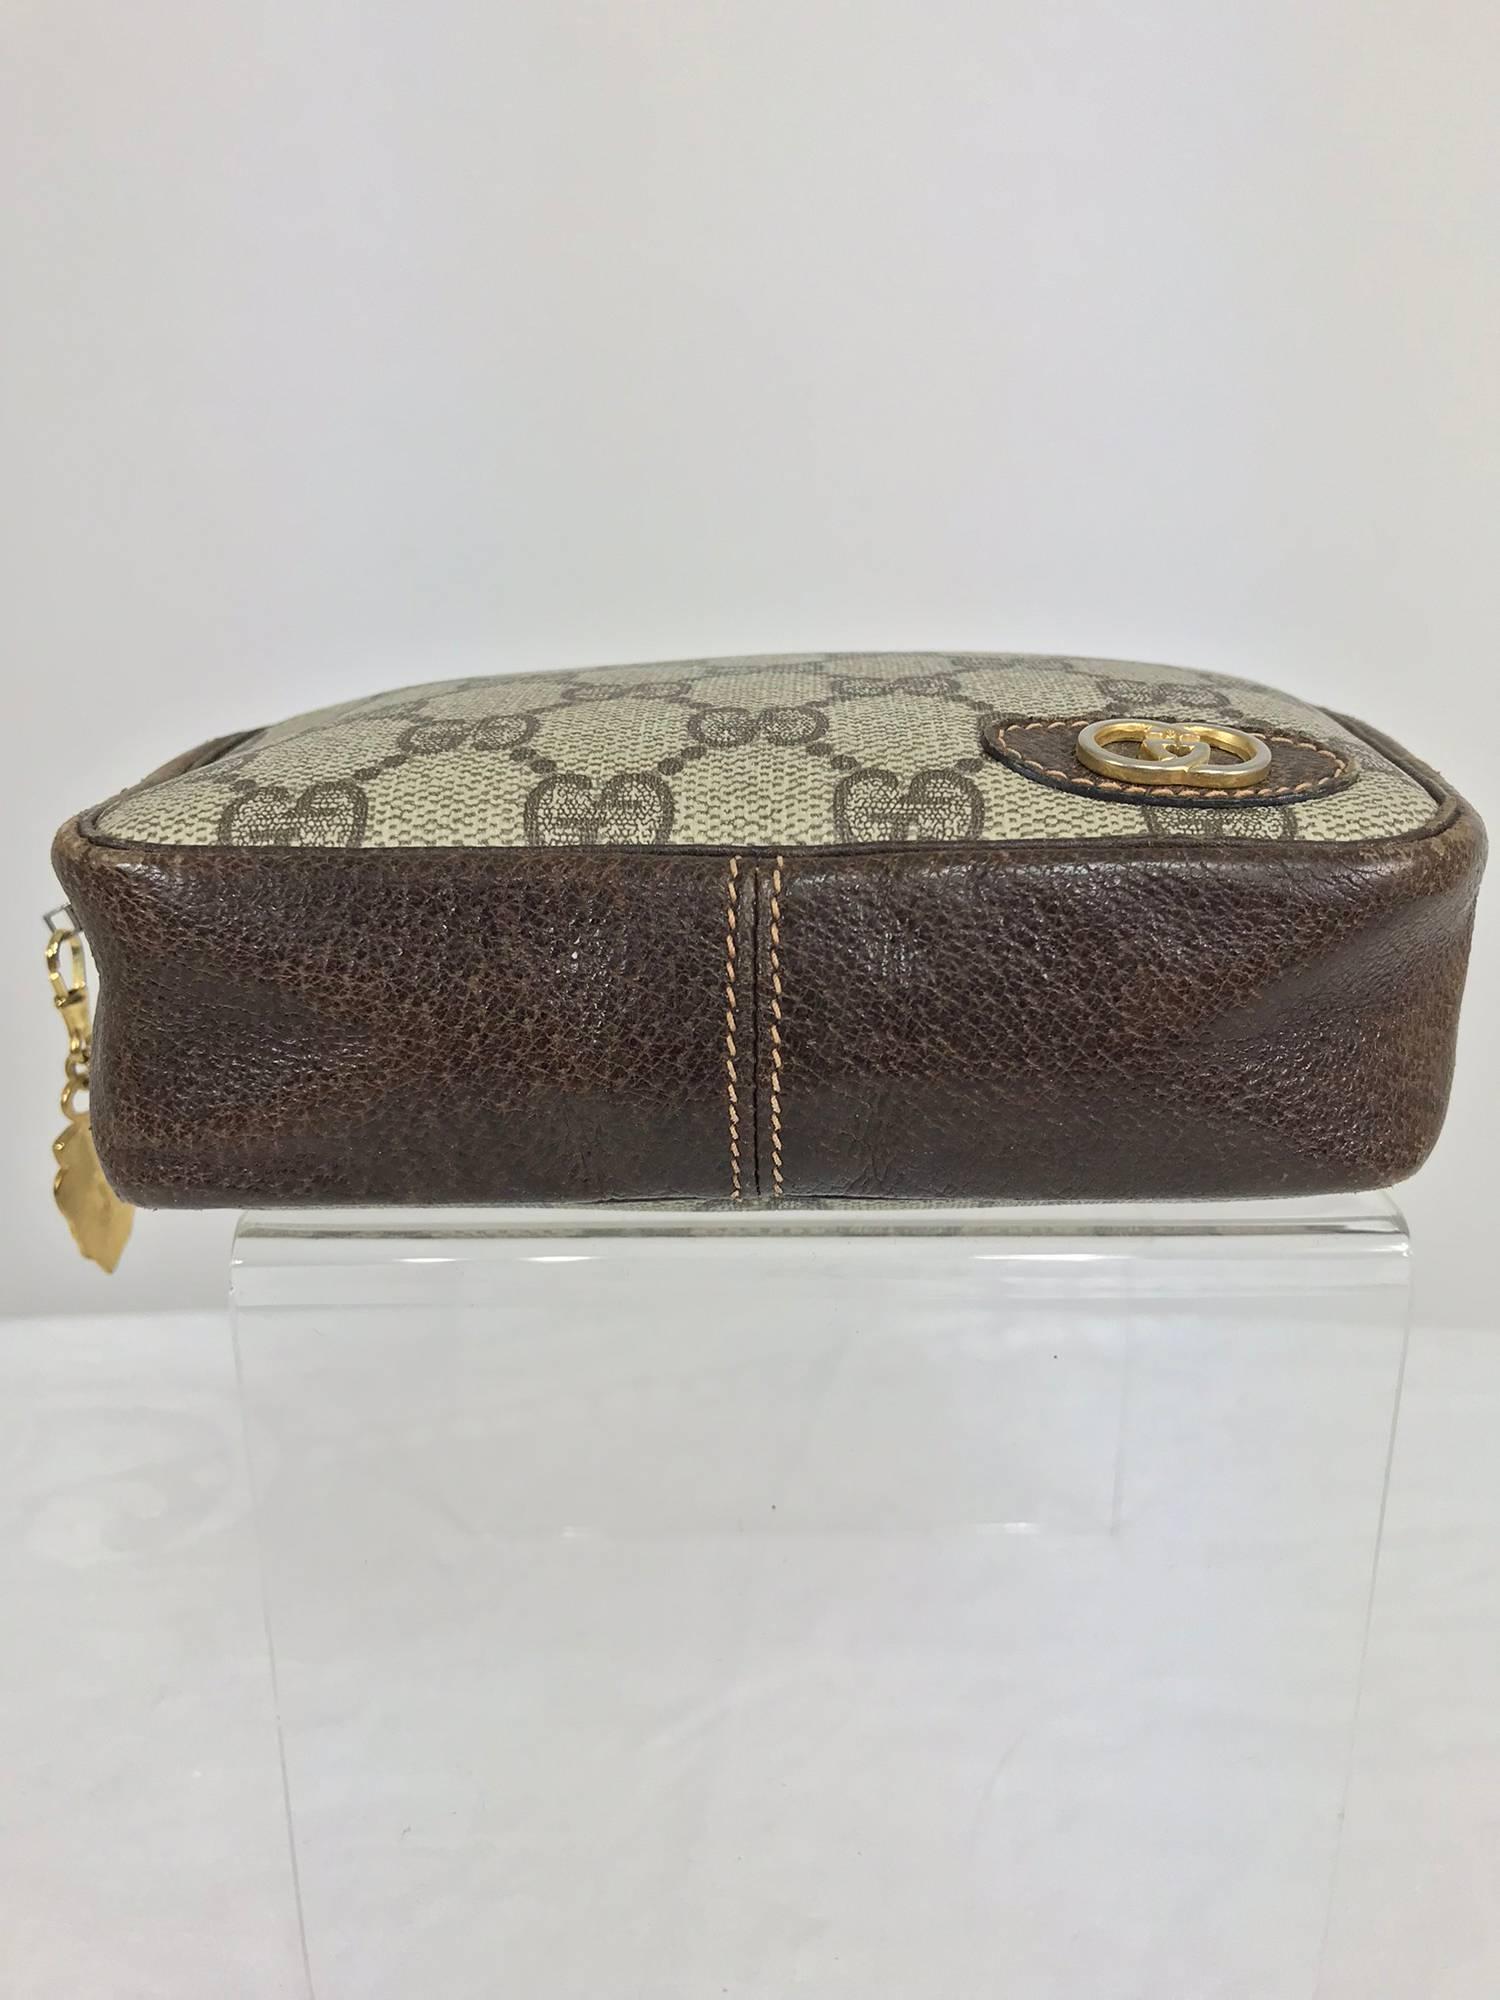 Vintage Gucci small leather and monogram vinyl cosmetic bag...Oval leather applique with metal intertwined G's at the front, the bag is pigskin leather at the sides, top and bottom...Lined in brown vinyl...Some wear but basically in very good usable